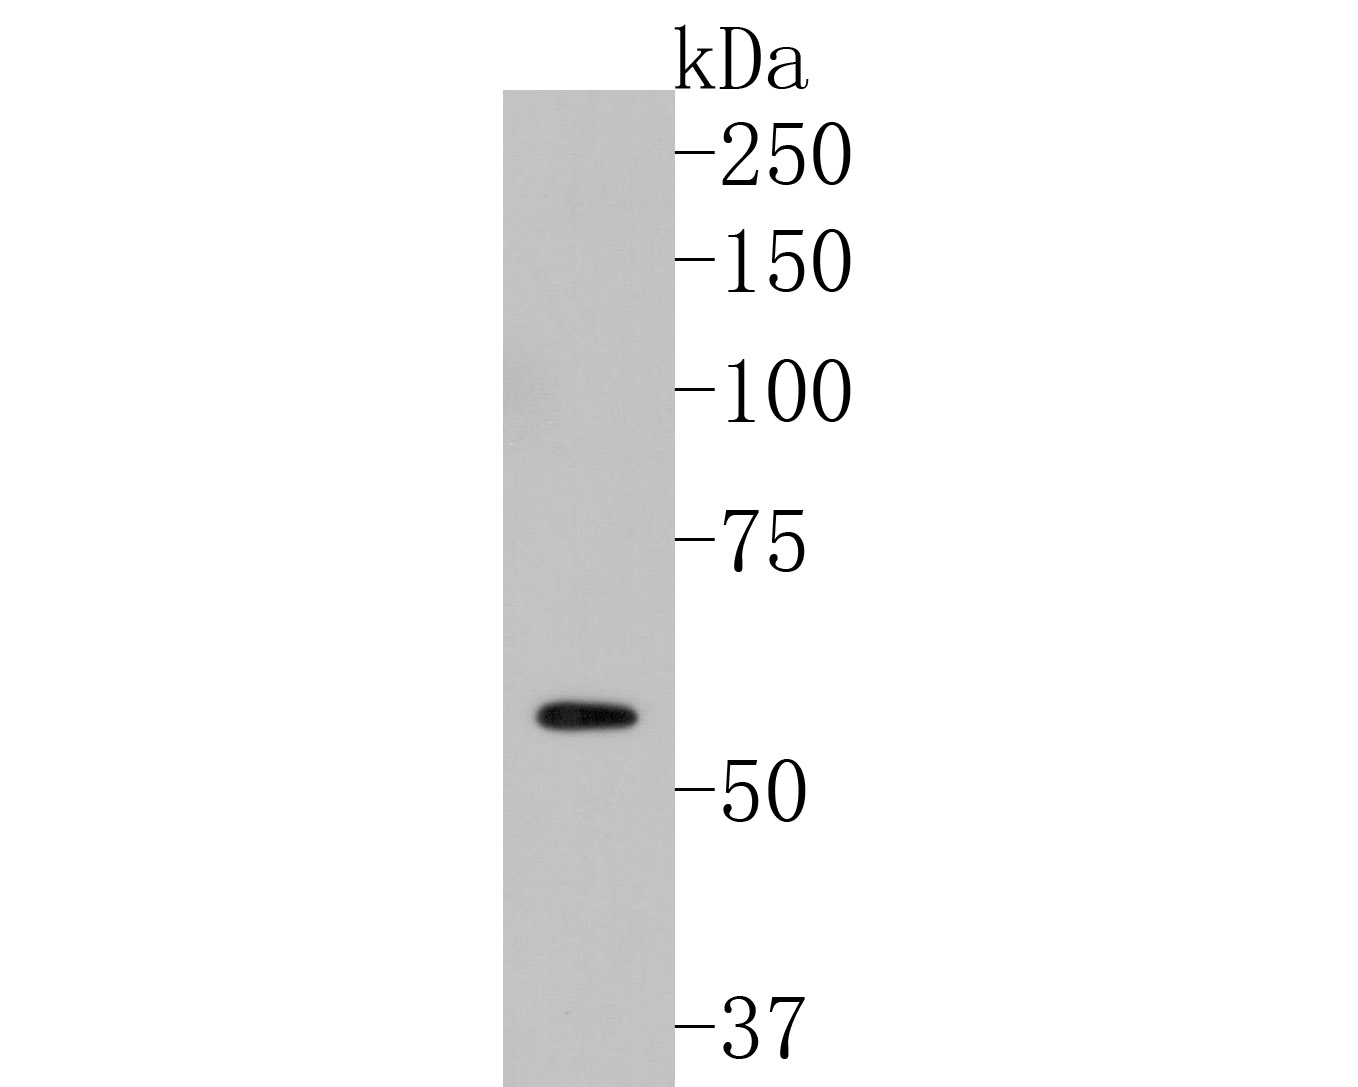 Western blot analysis of MMP9 on U937 cell lysates. Proteins were transferred to a PVDF membrane and blocked with 5% BSA in PBS for 1 hour at room temperature. The primary antibody (ER1706-40, 1/500) was used in 5% BSA at room temperature for 2 hours. Goat Anti-Rabbit IgG - HRP Secondary Antibody (HA1001) at 1:5,000 dilution was used for 1 hour at room temperature.